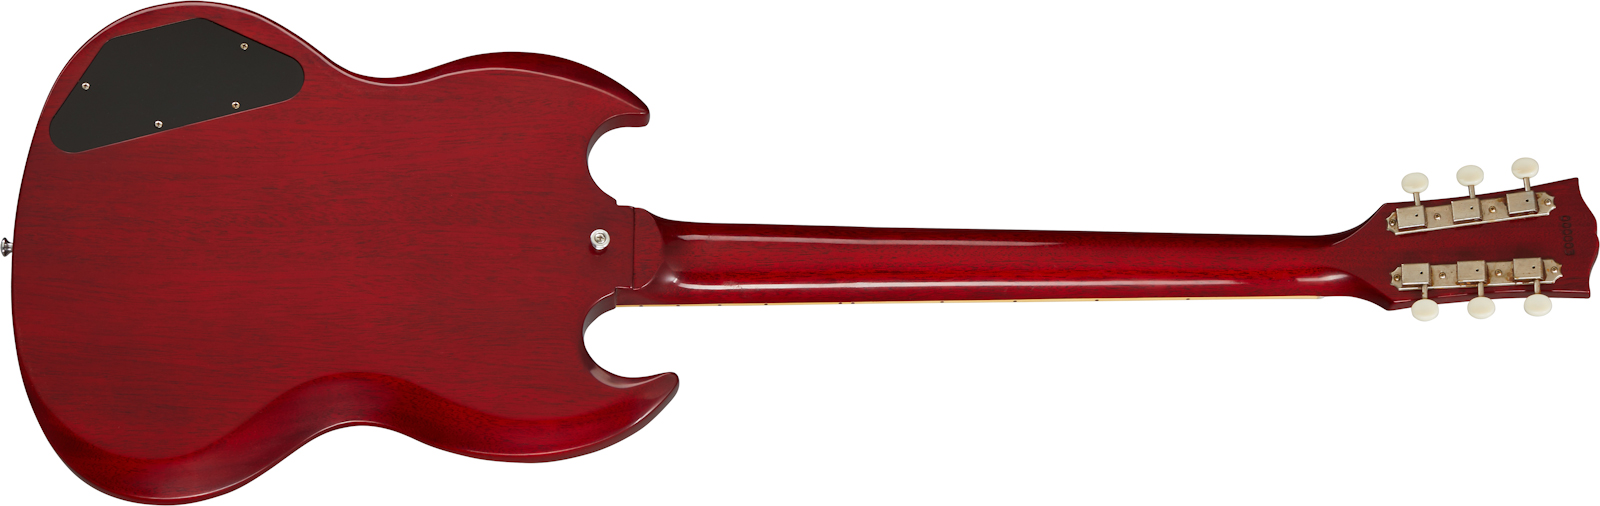 Gibson Custom Shop Sg Special 1963 Reissue 2p90 Ht Rw - Vos Cherry Red - Double cut electric guitar - Variation 1